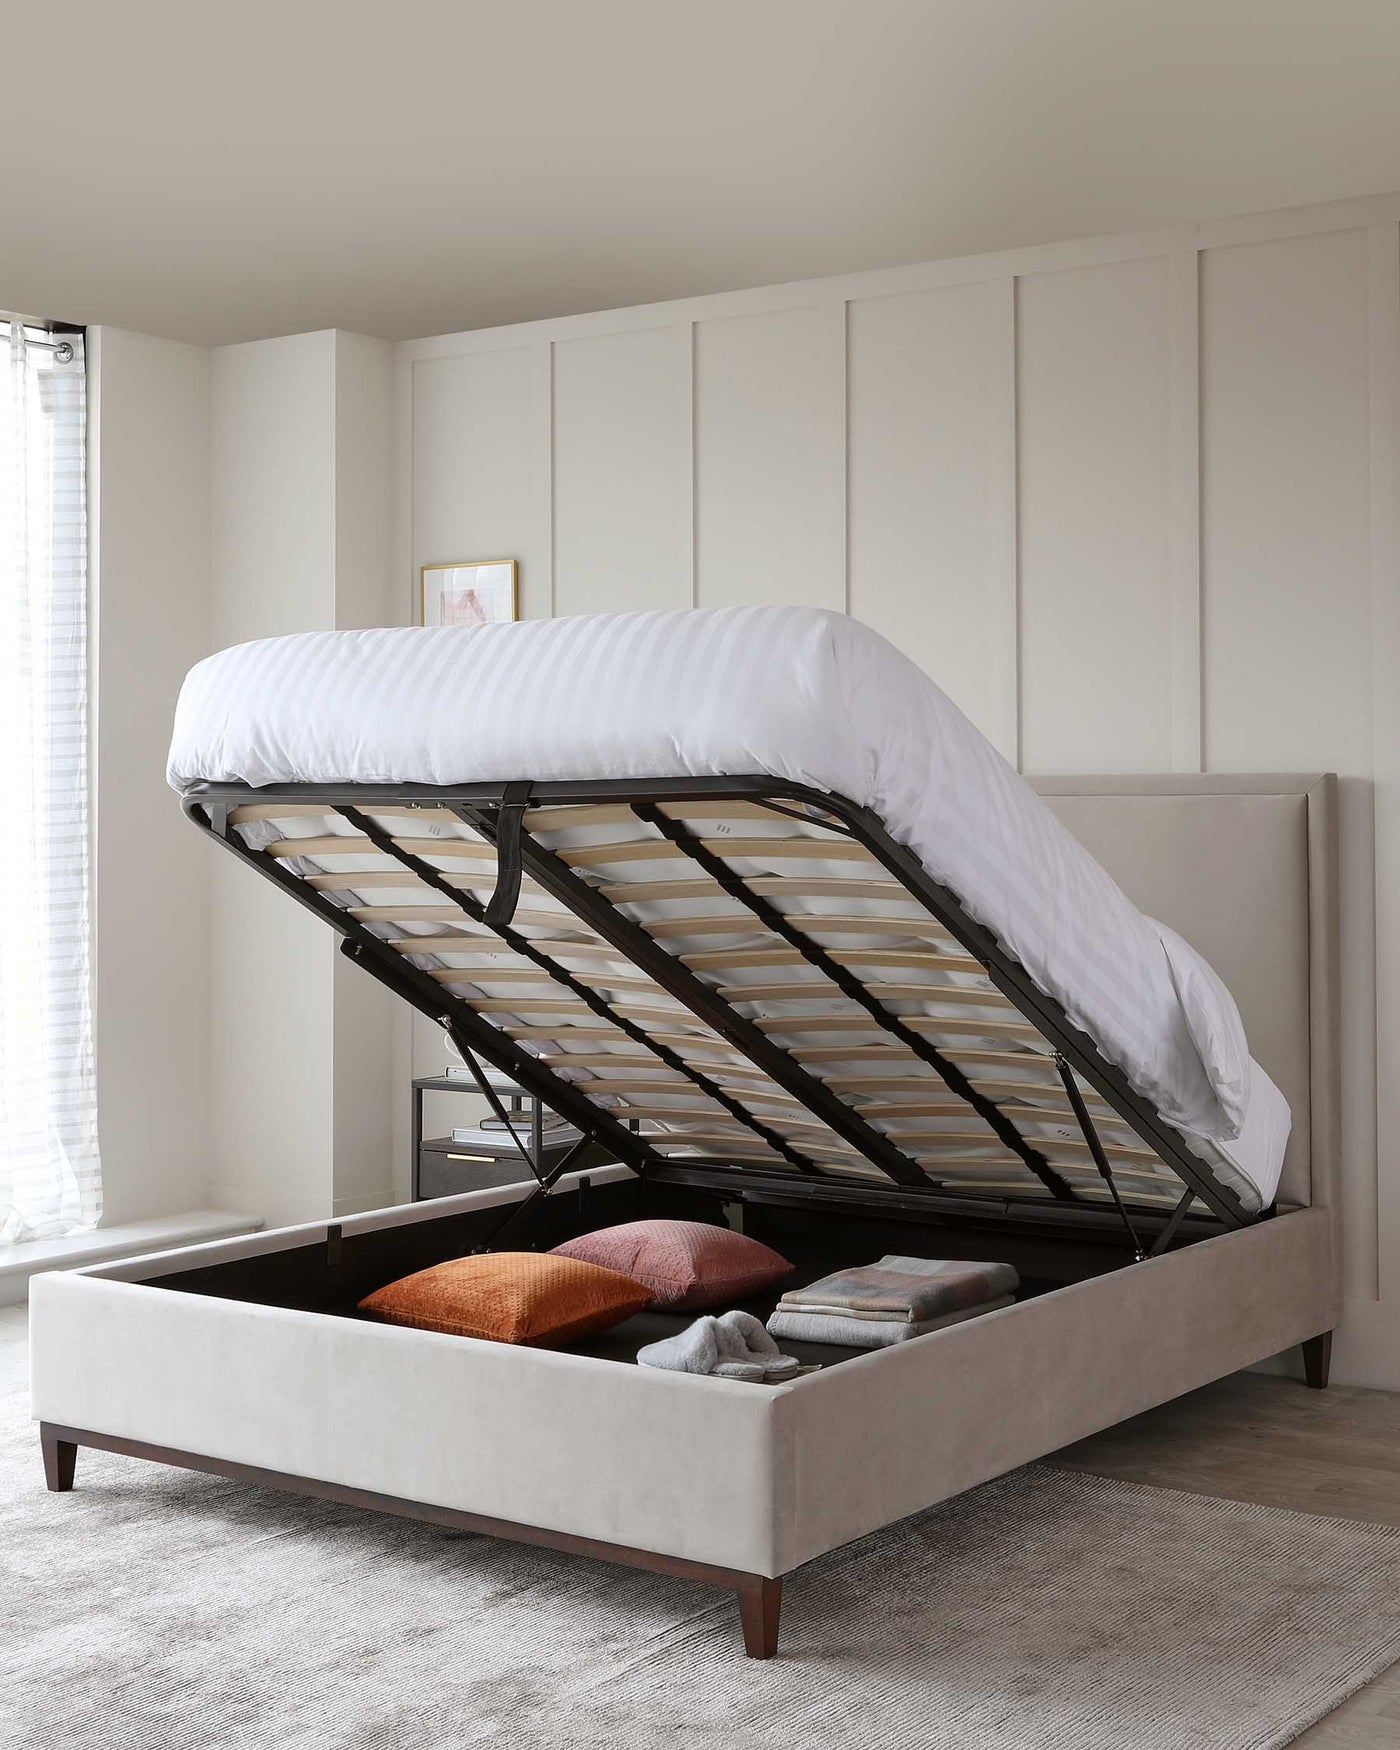 Modern upholstered bed frame with lift-up storage space beneath the mattress support slats, showcasing organized bedding and pillows.